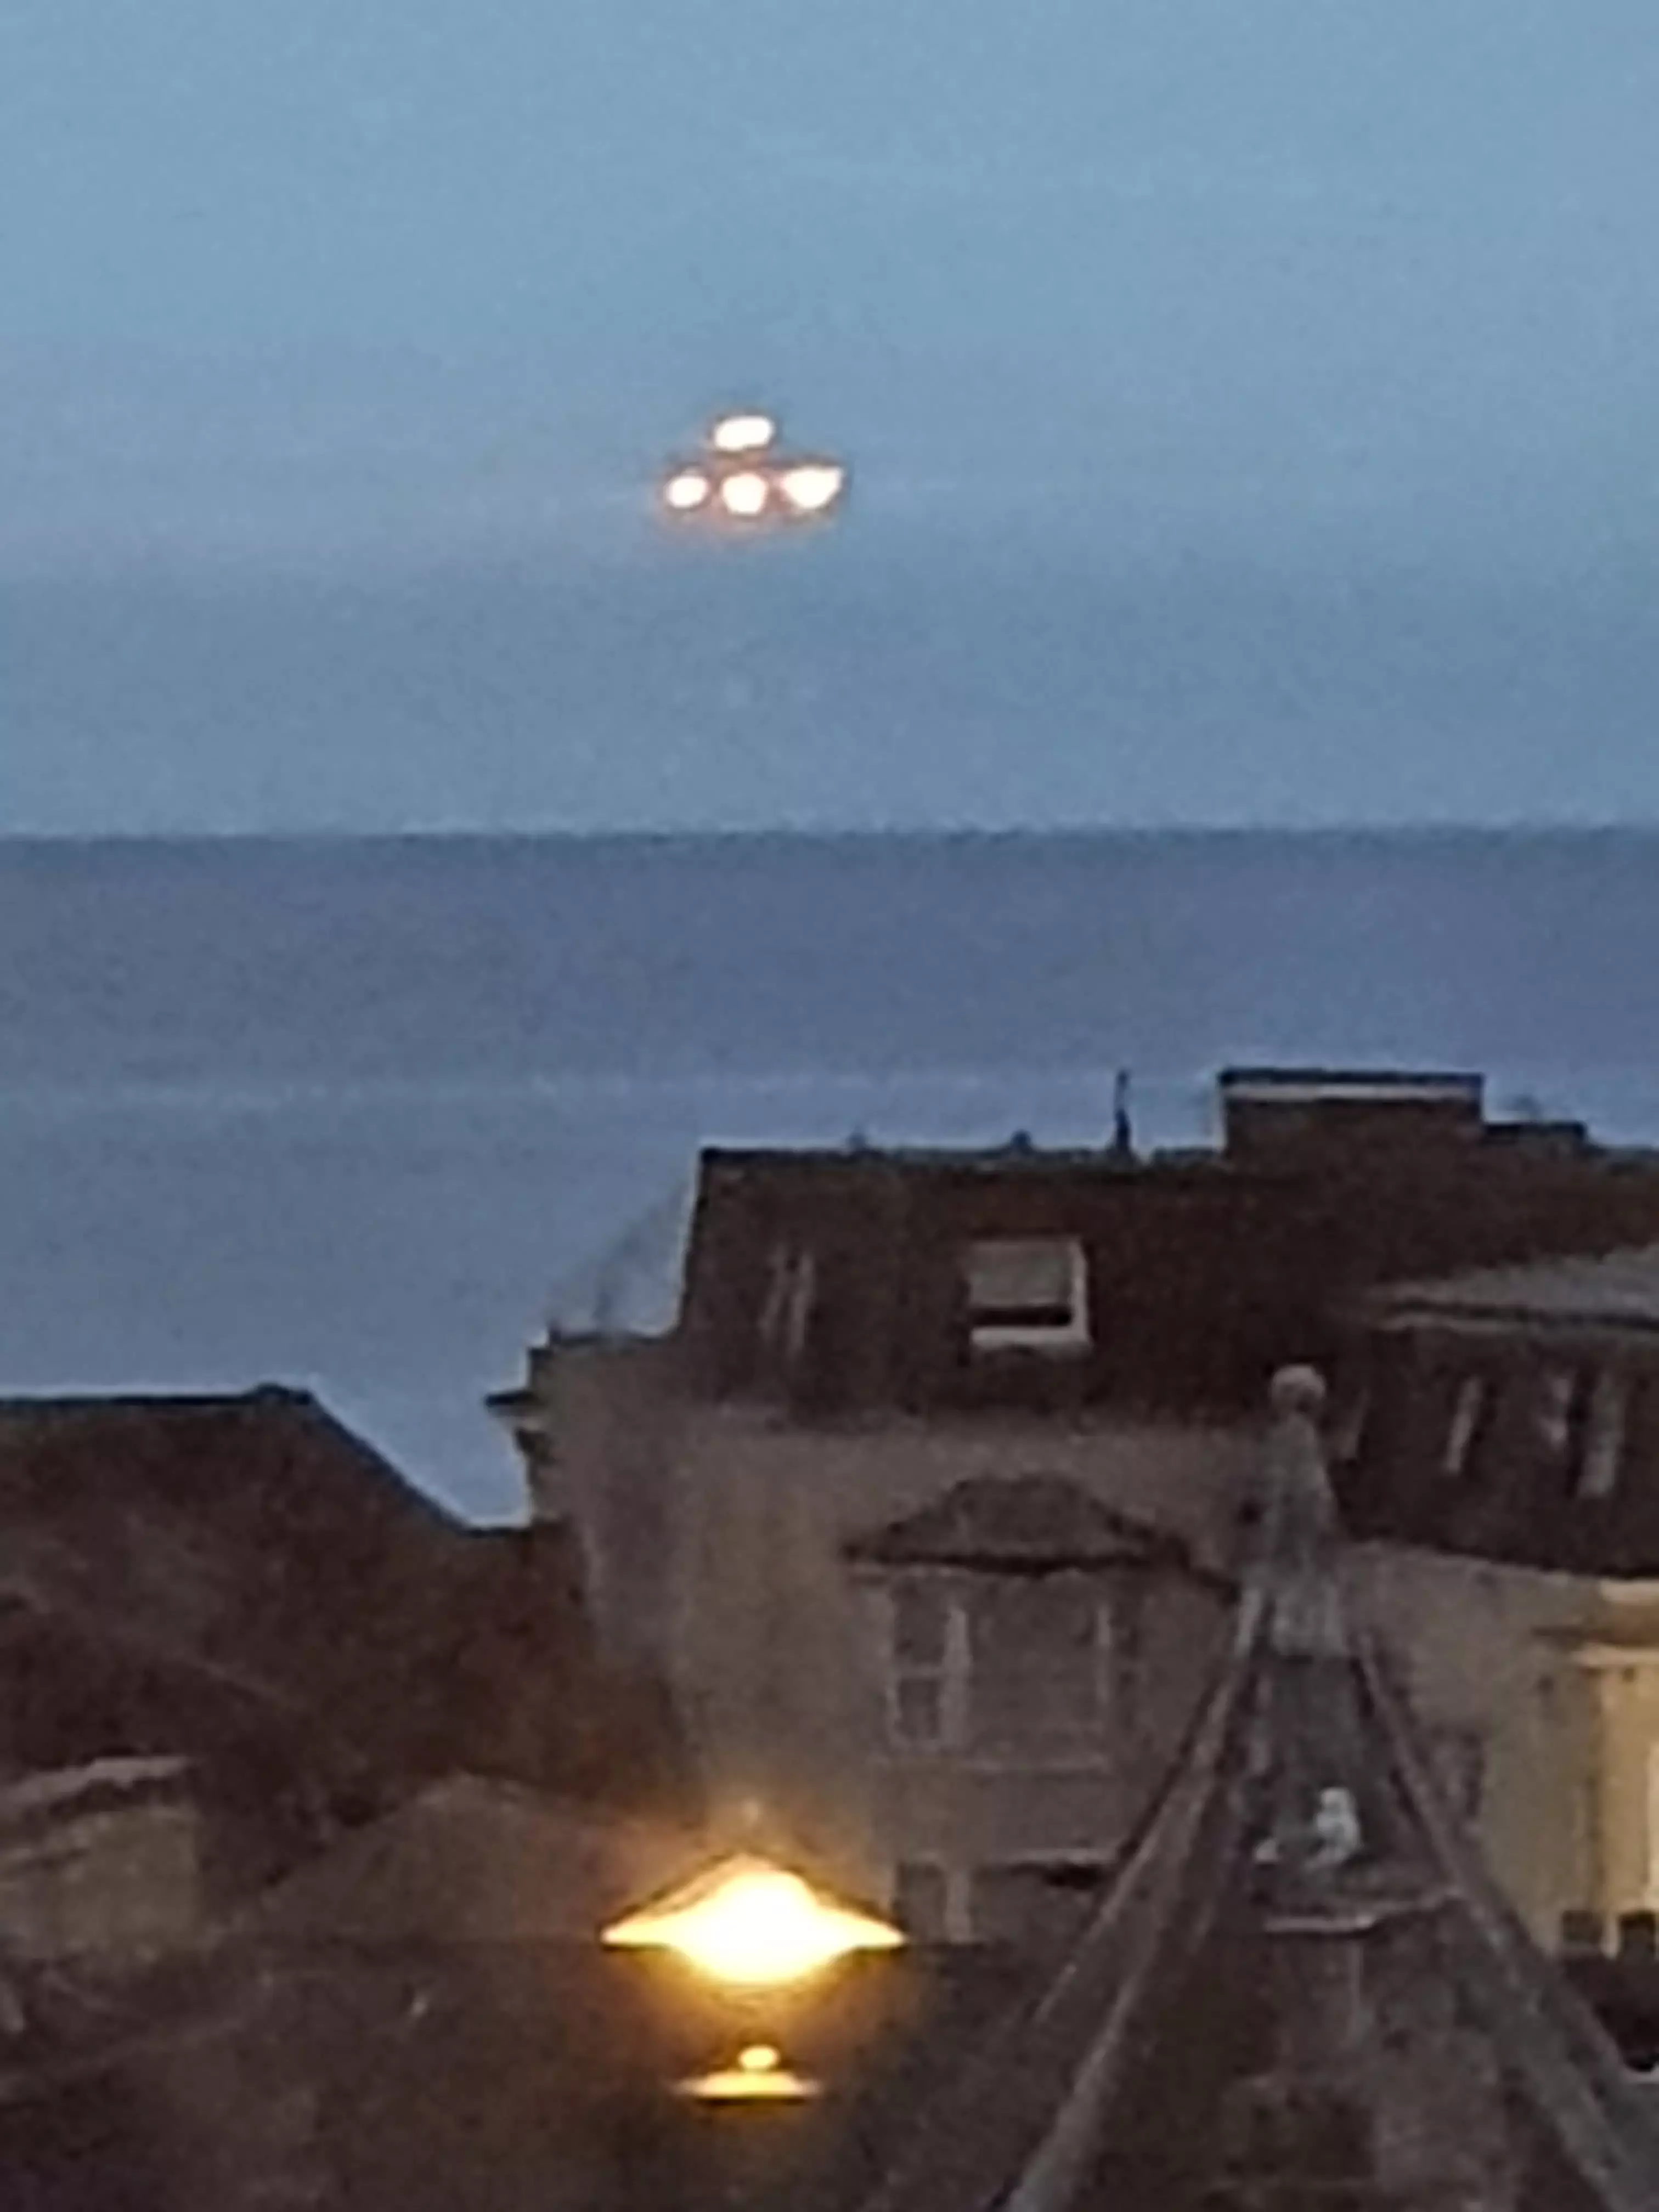 Ship on the horizon, or conclusive proof of alien life?